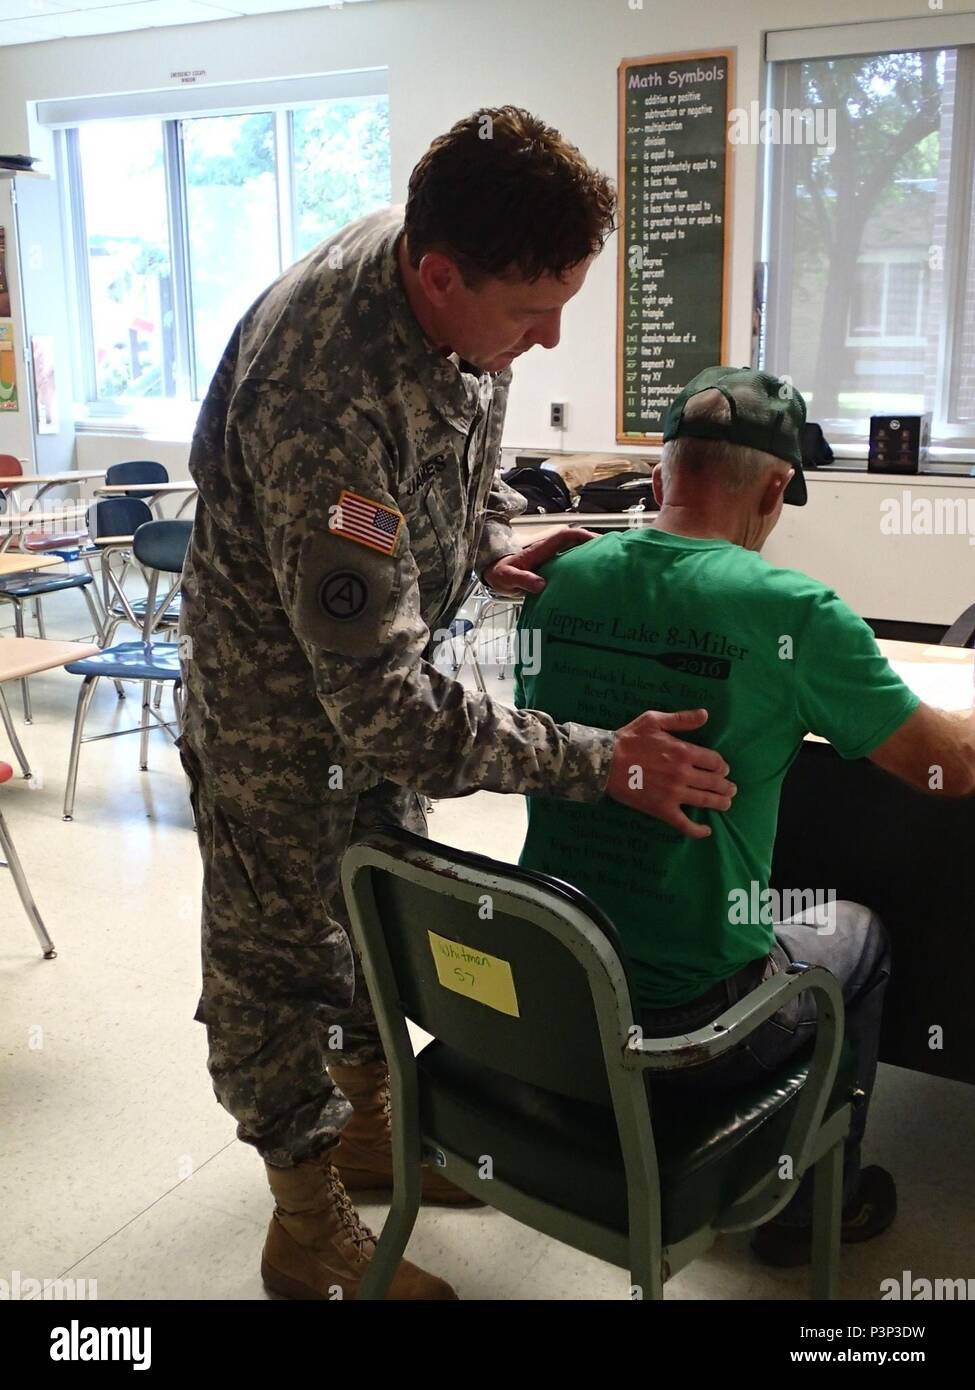 Lt. Col. Christopher James, a physician from Company A, 48th Combat Support Hospital out of Fort Story, Va., conducts a physical exam of a patient during Greater Chenango Cares, July 21, 2016.  Greater Chenango Cares is one of the Innovative Readiness Training events that provides real-world training in a joint civil-military environment while delivering world-class medical care to the people of Chenango County, N.Y., from July 15-24. Stock Photo